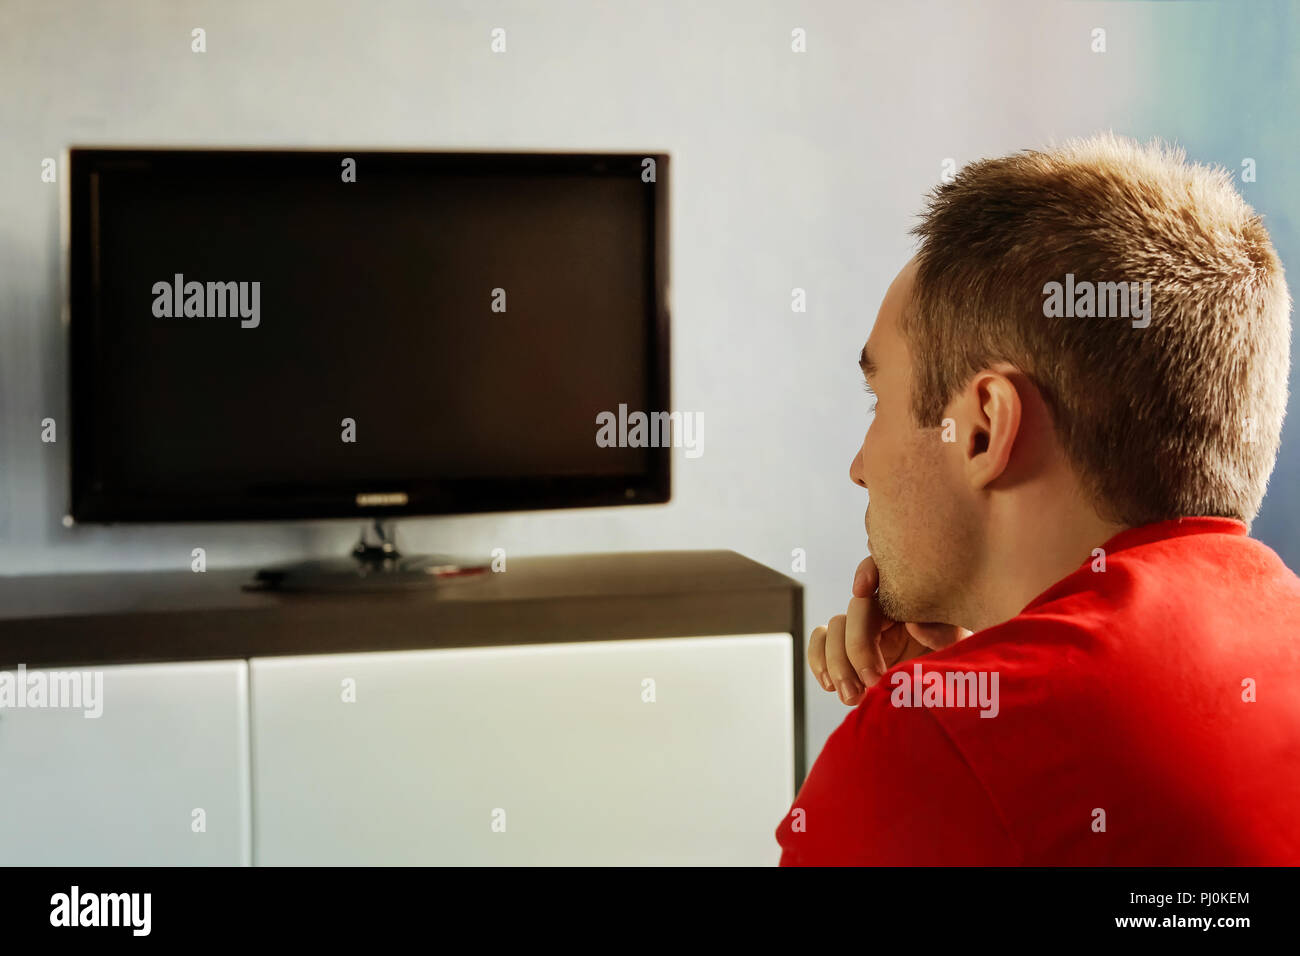 The young guy watches the TV turned off carefully. Single man on the couch watching tv, changing channels Stock Photo